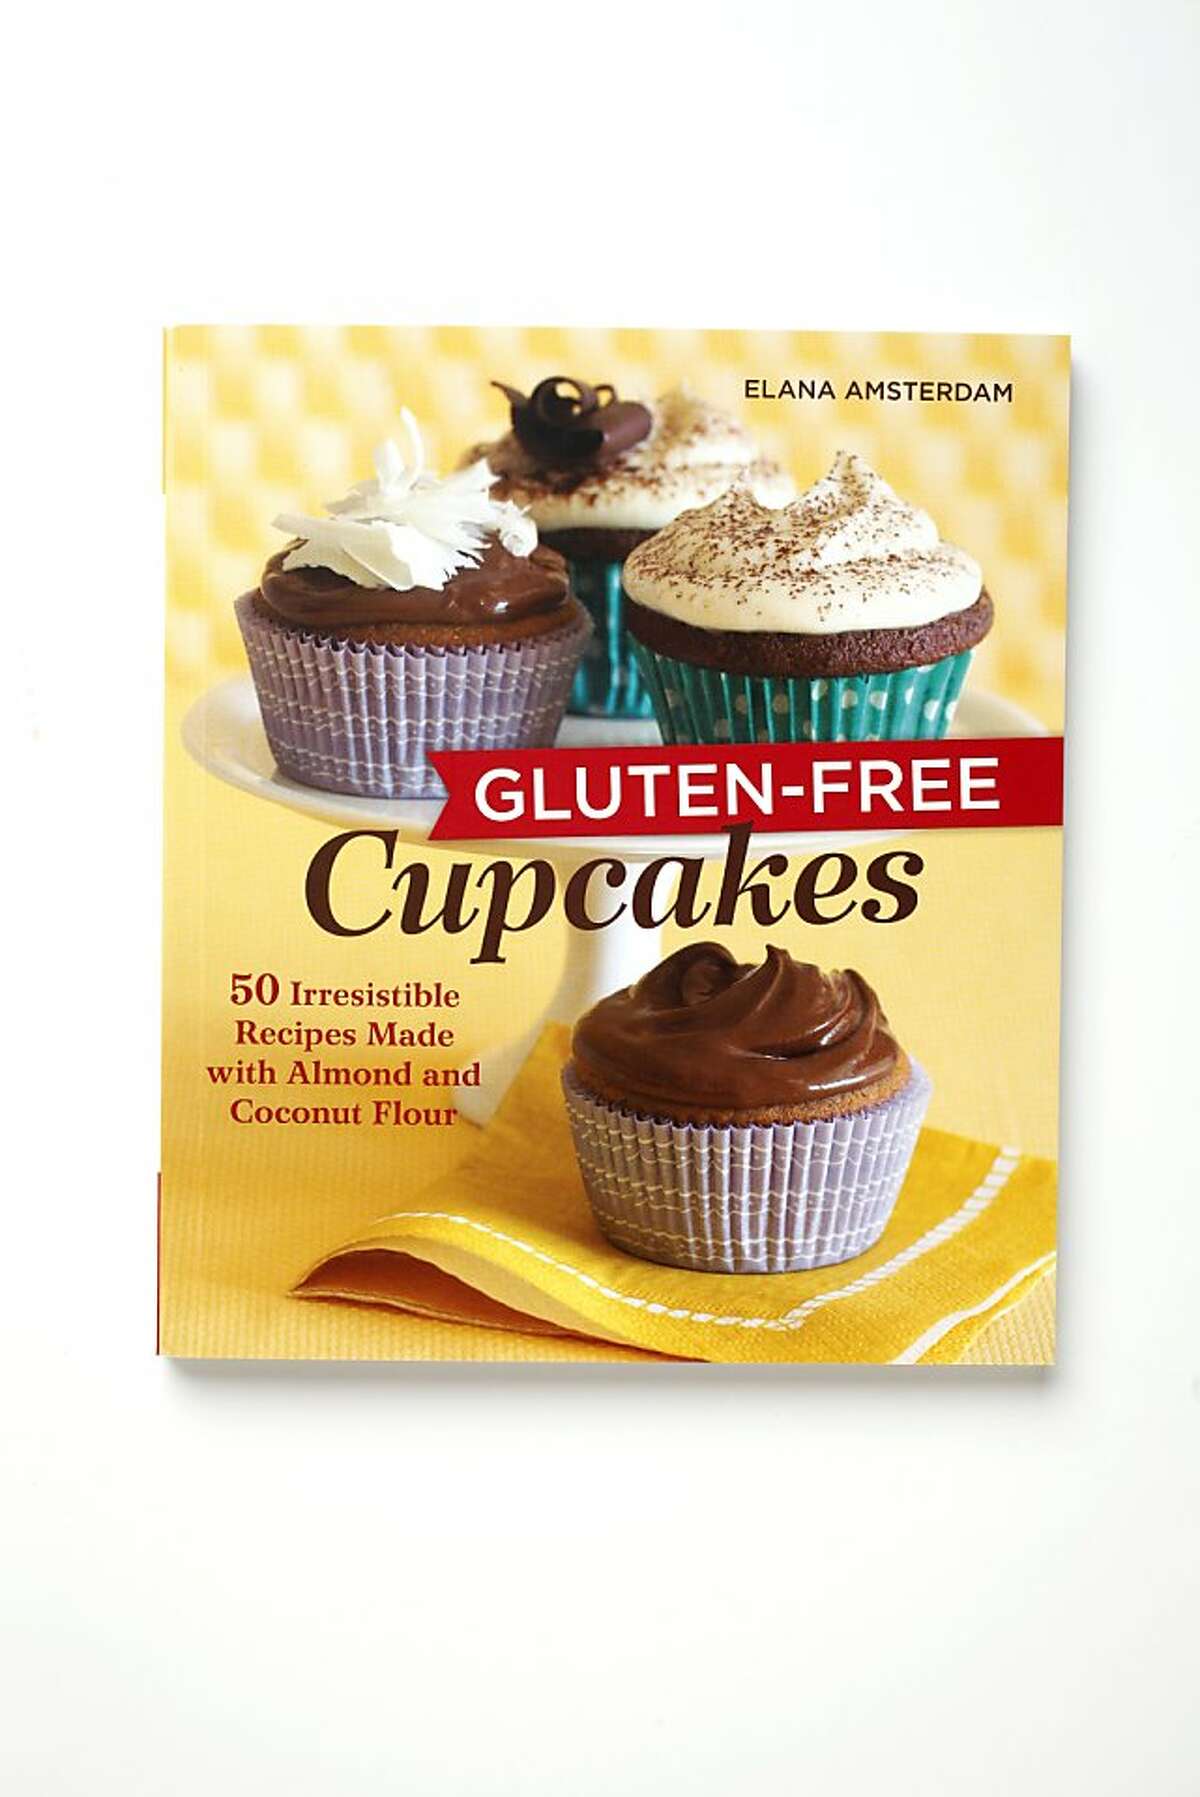 "GLUTEN-FREE CUPCAKES: 50 Irresistible Recipes Made with Almond & Coconut Flour, " by Elana Amsterdam